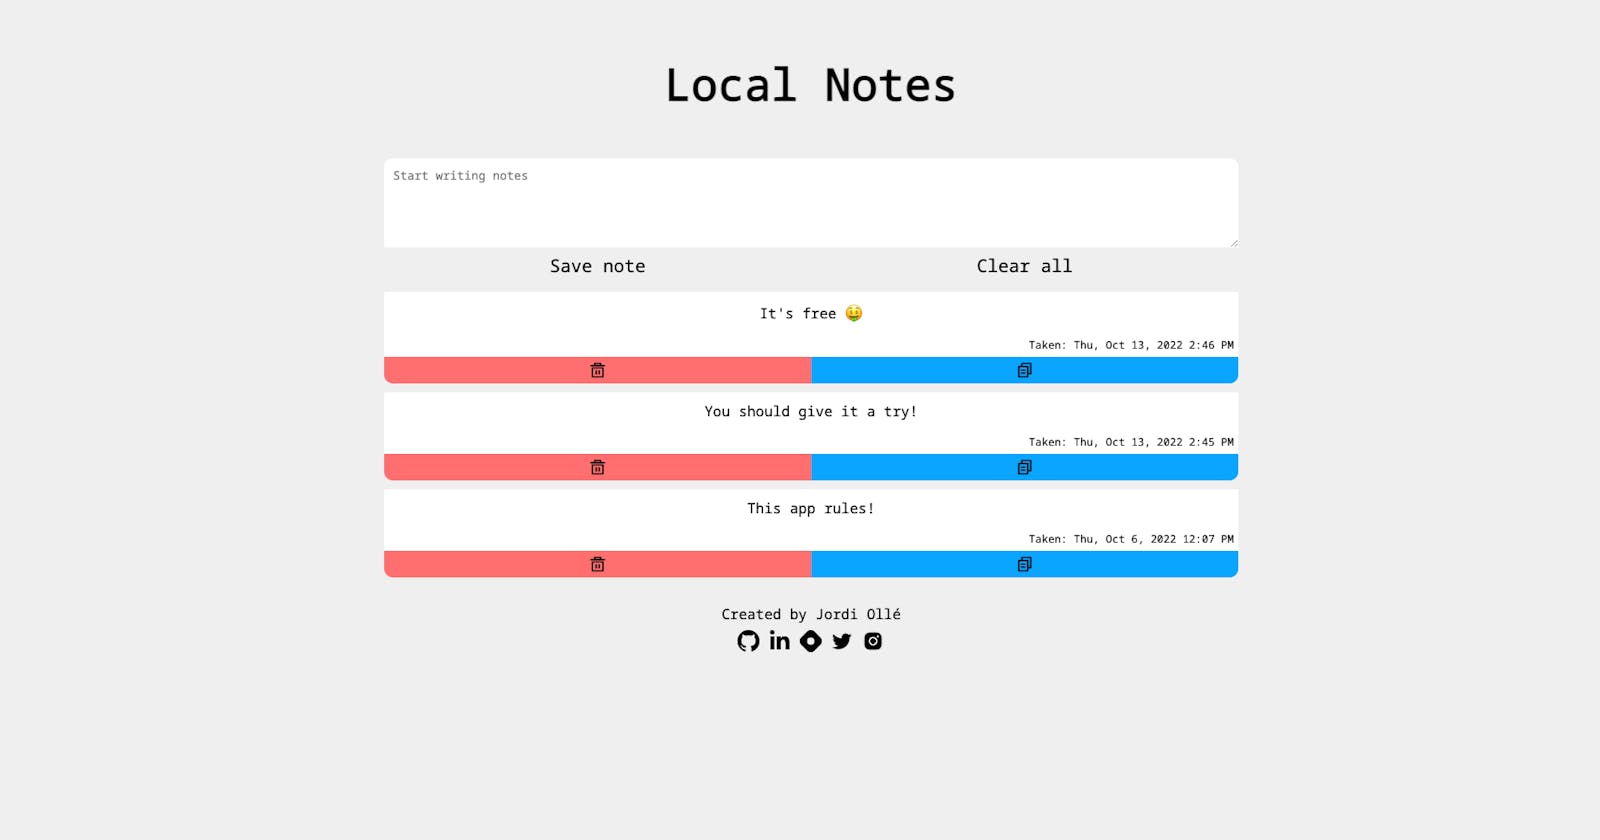 Project: Local Notes